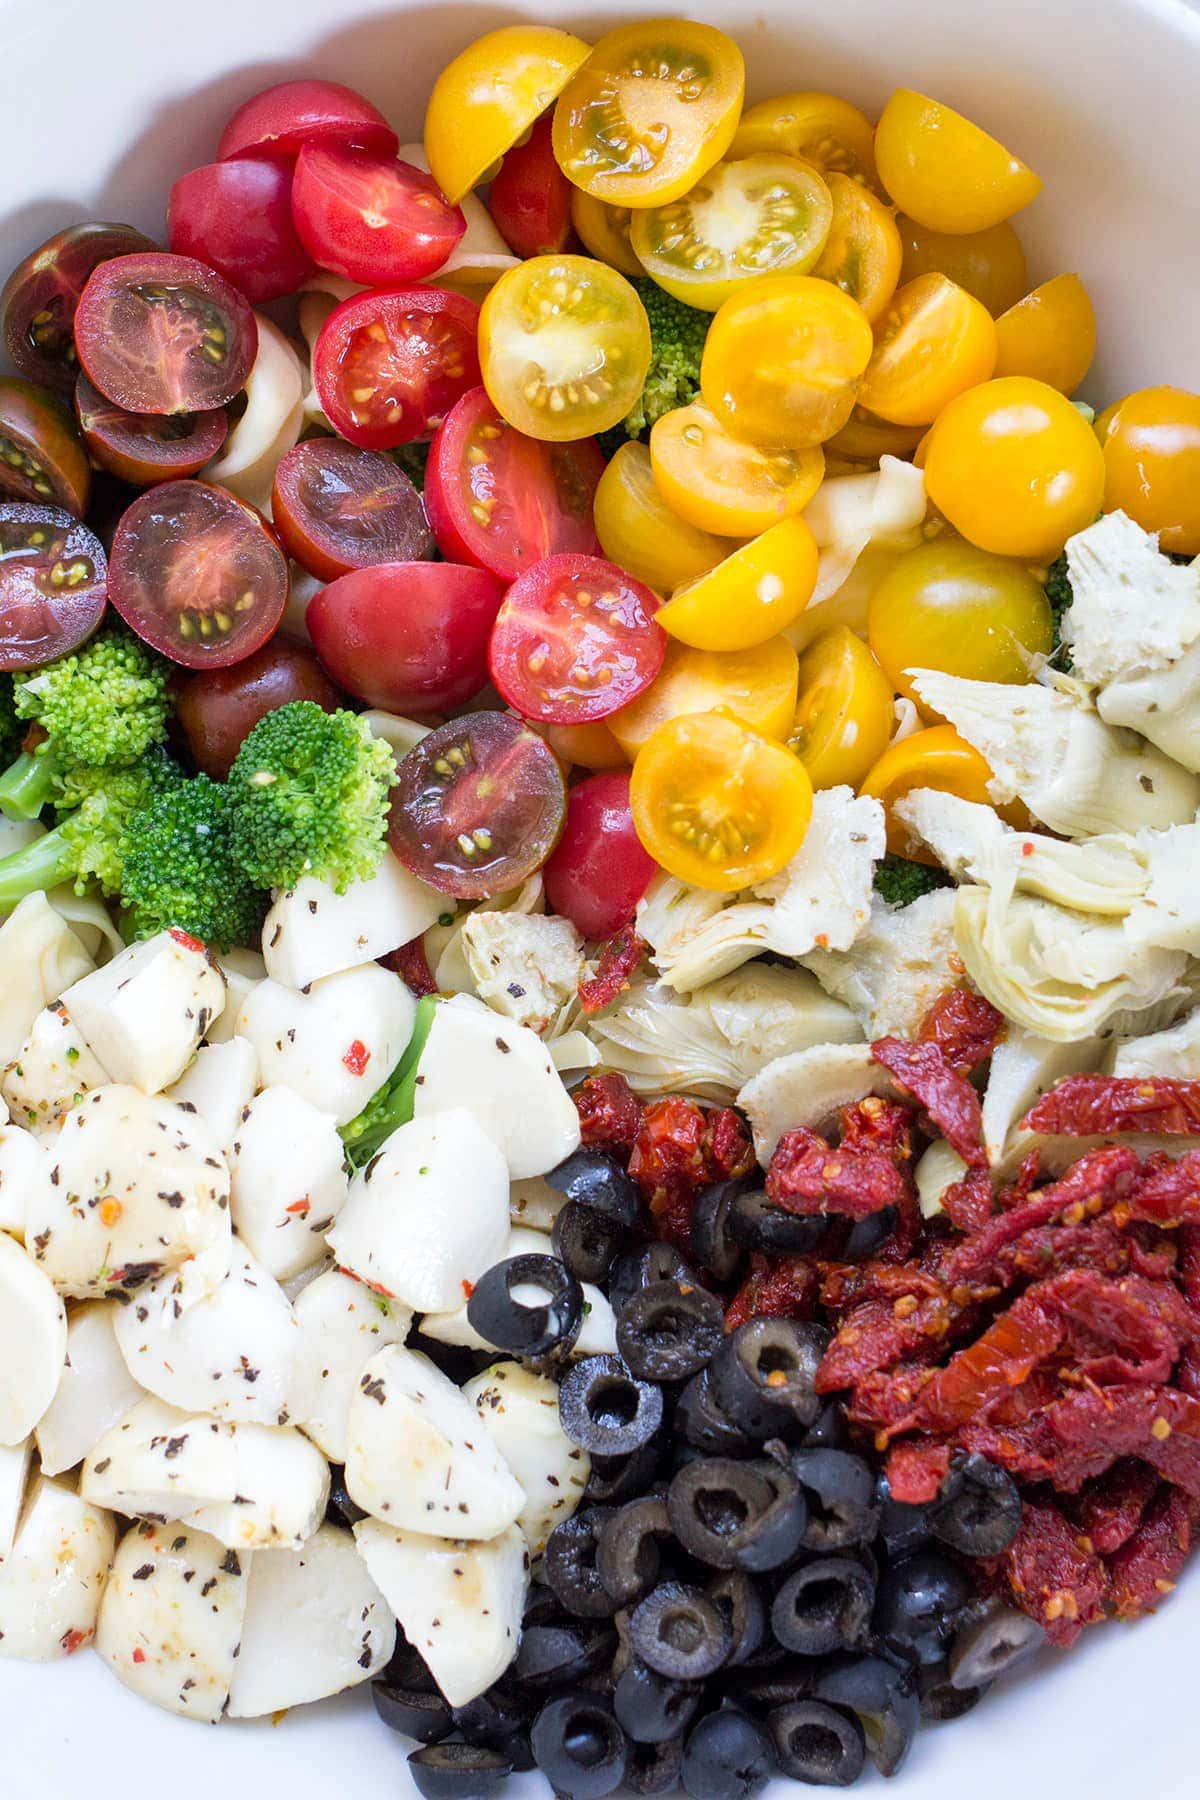 Easy Tortellini Pasta Salad with Sundried Tomatoes and Artichoke Hearts